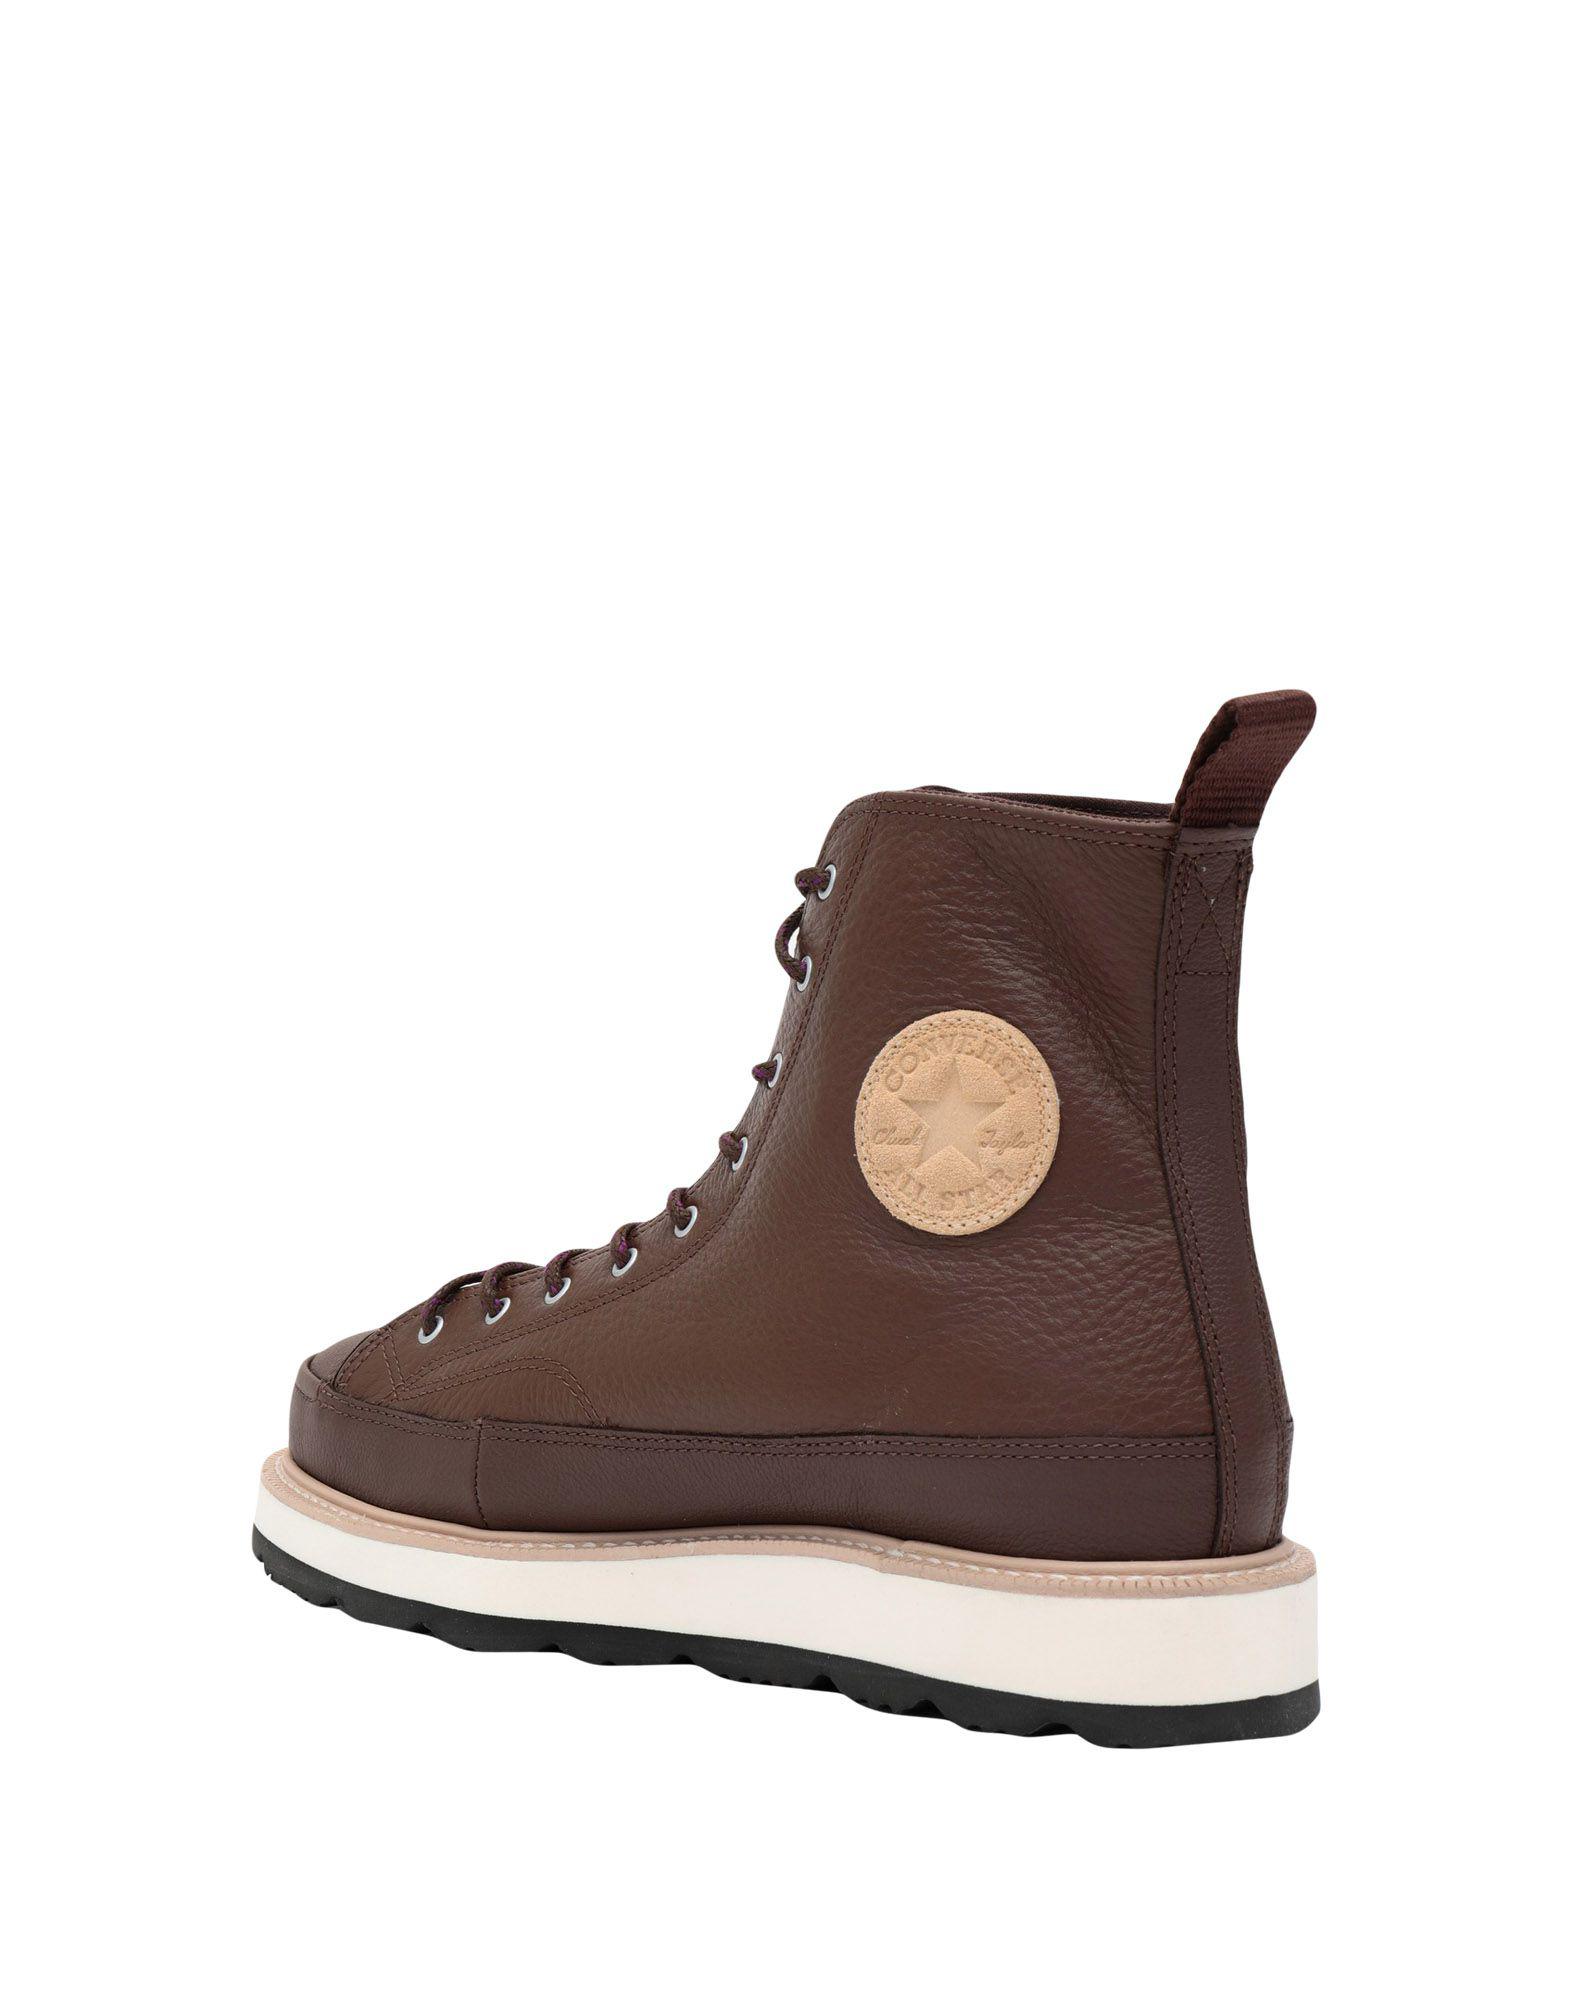 mens leather converse boots